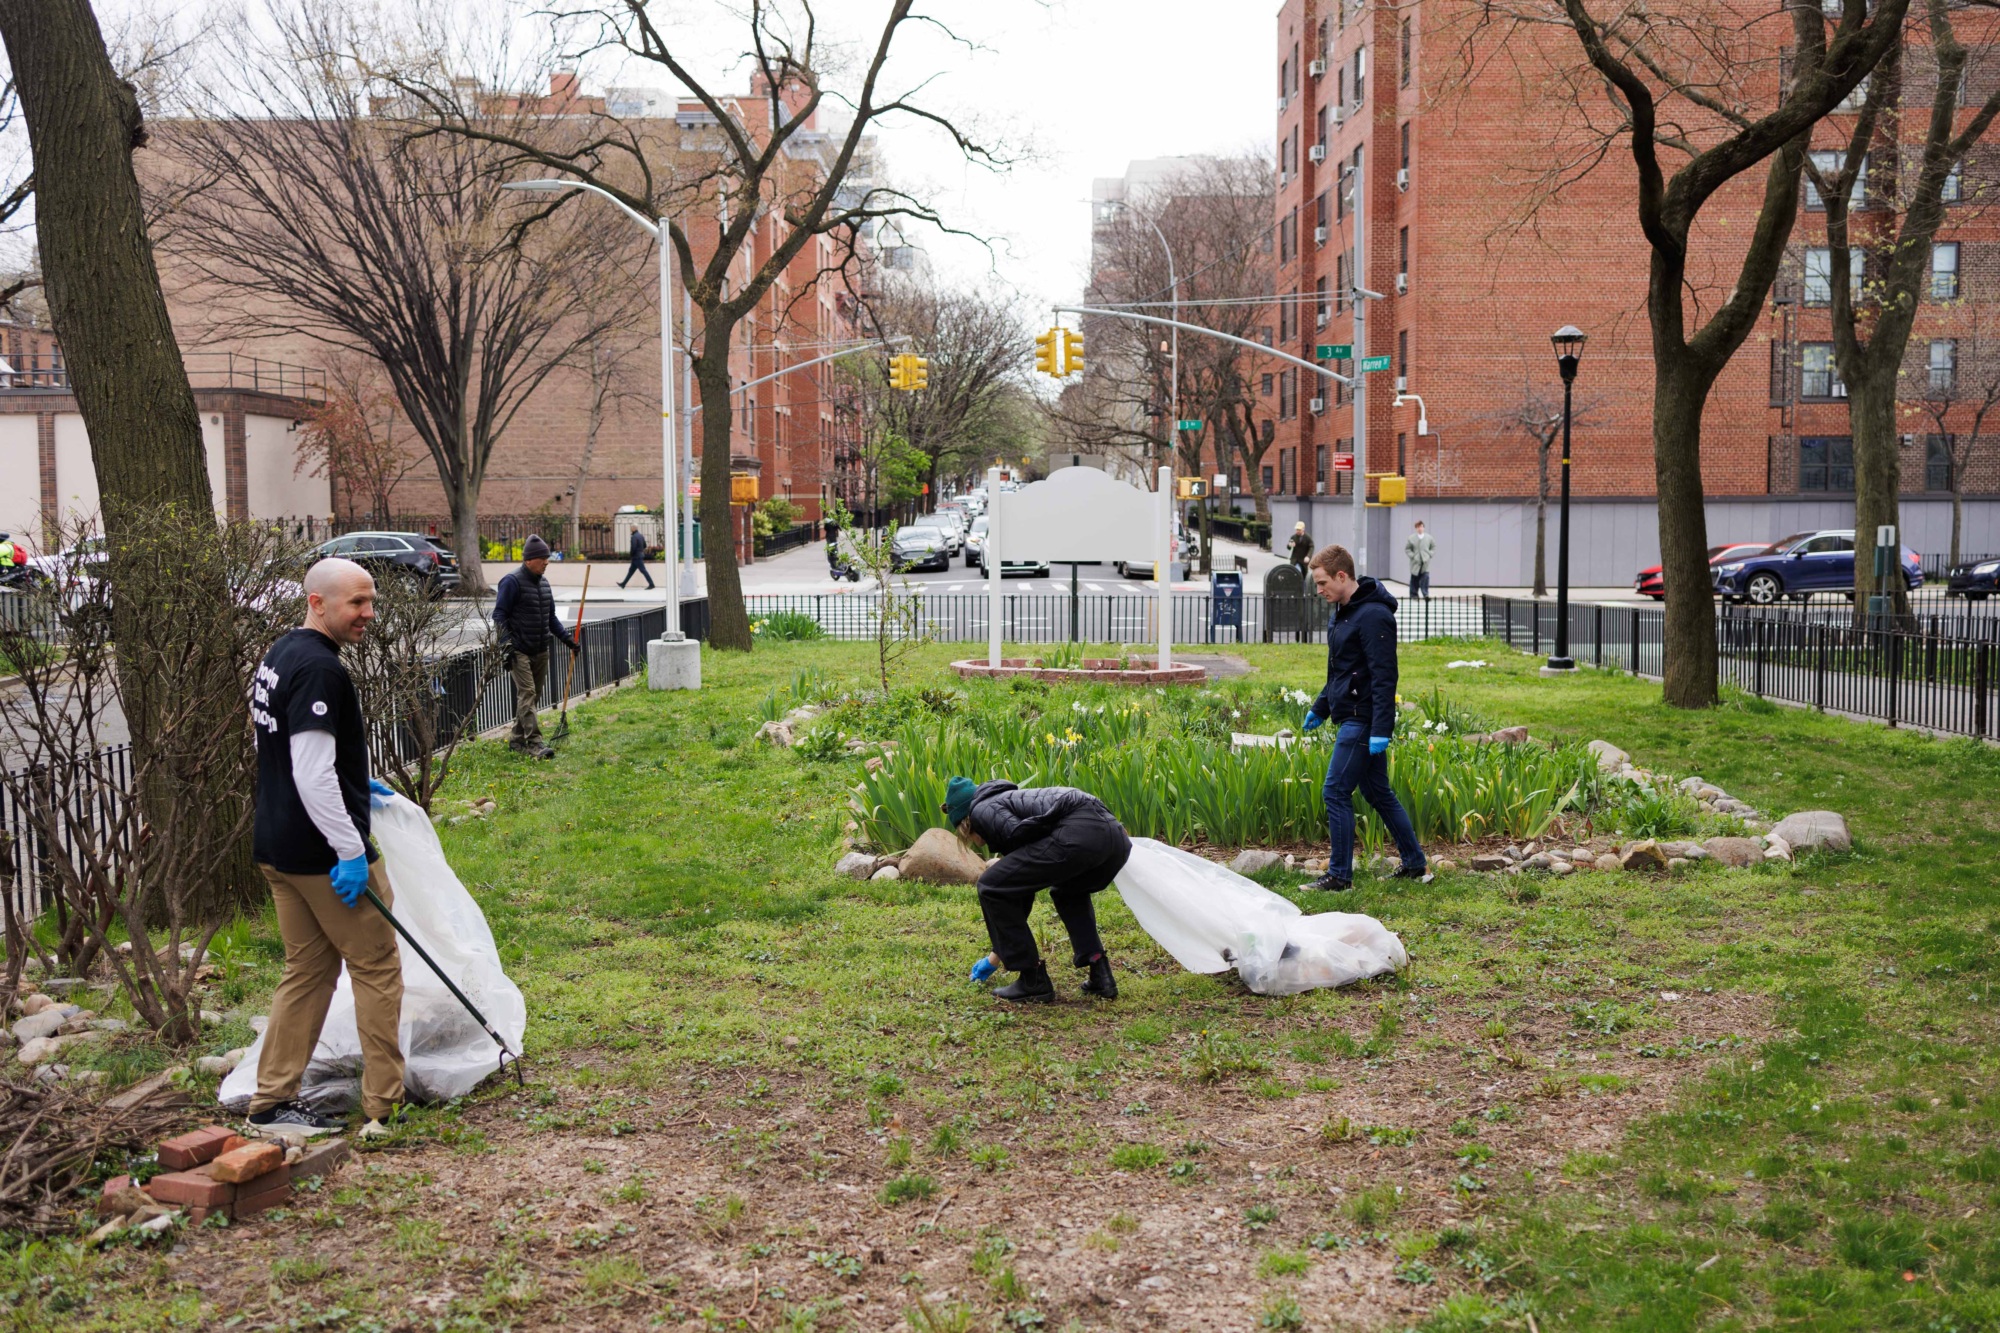 Three people participating in a community cleanup in a city park, collecting trash into large white bags.